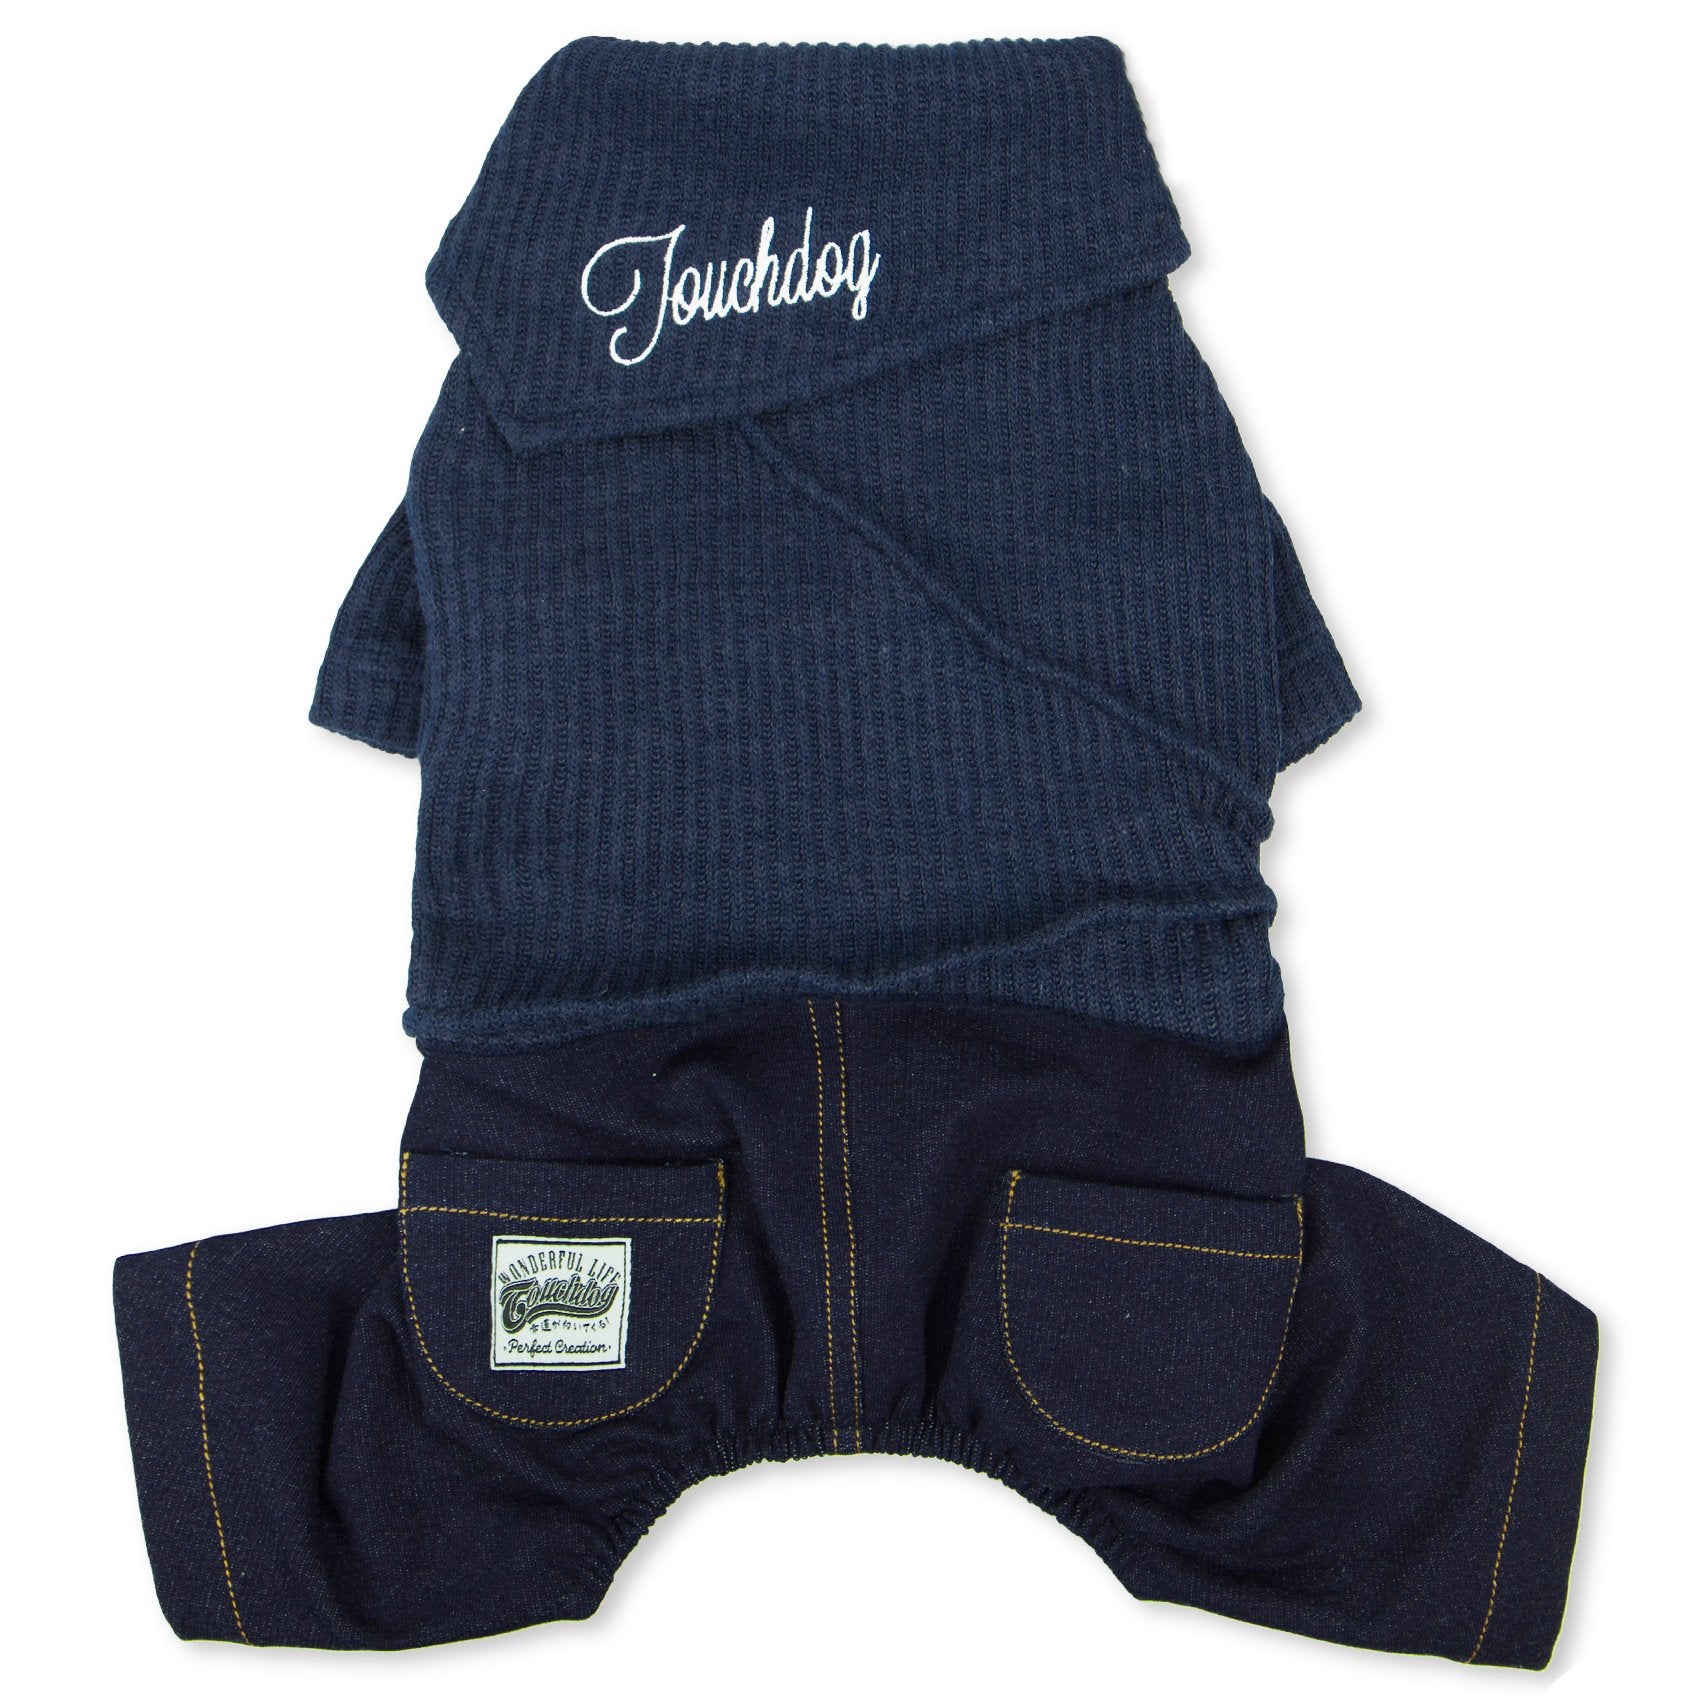 Touchdog Vogue Sweater & Denim Pant Outfit - Small - Navy